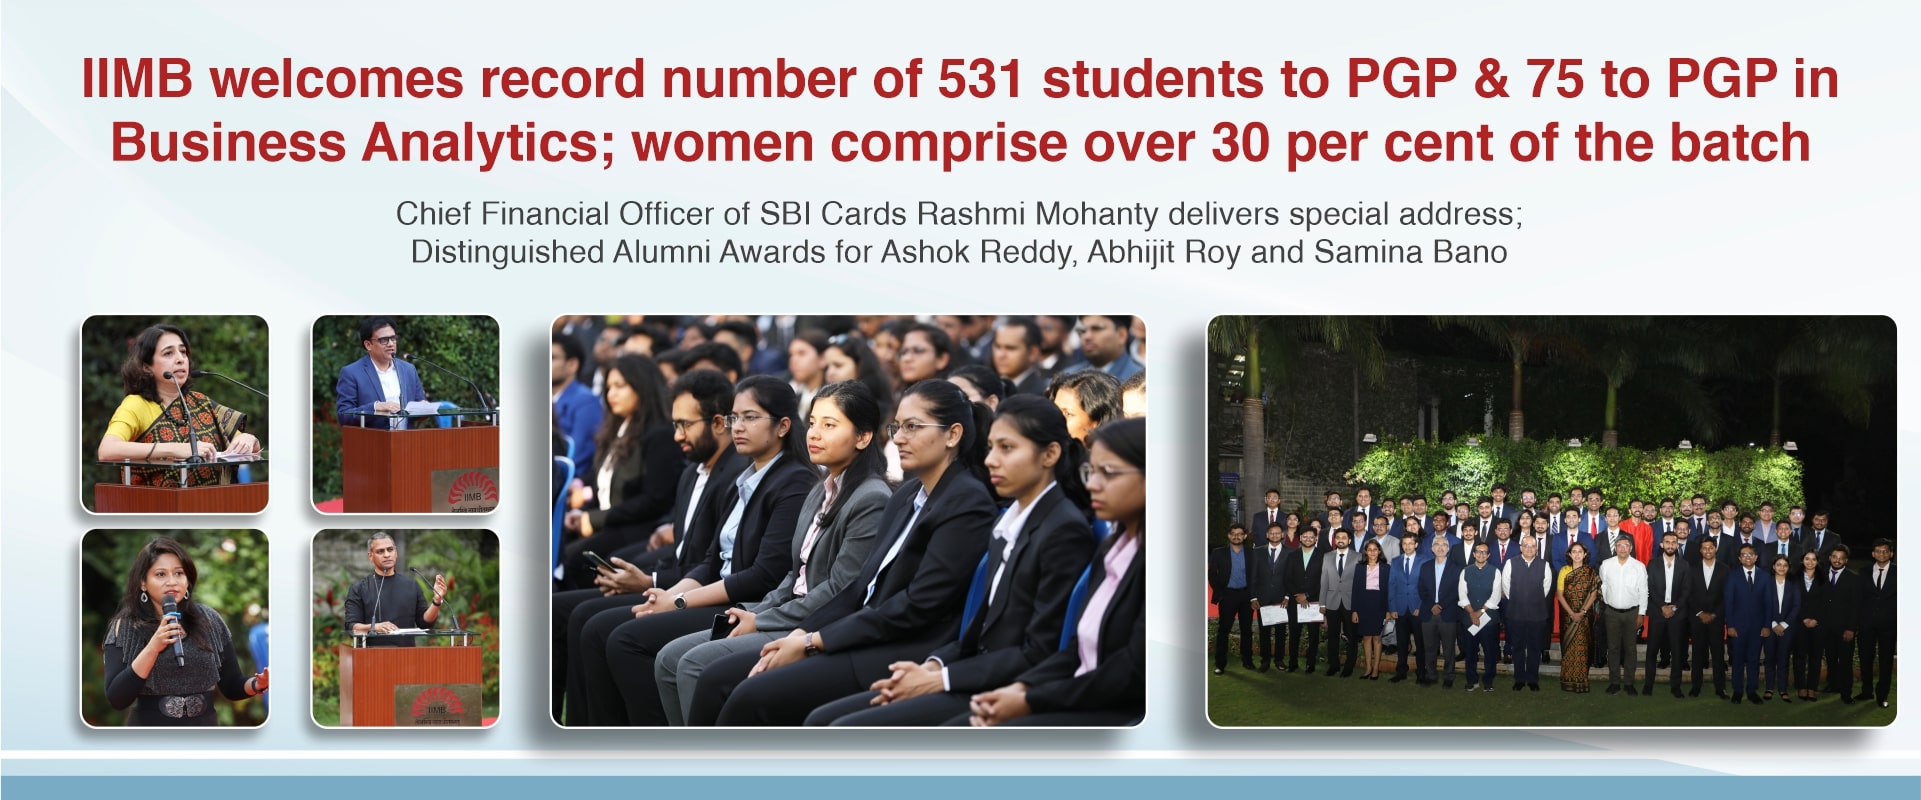 IIMB welcomes record number of 531 students to PGP & 75 to PGP in Business Analytics; women comprise over 30 per cent of the batch